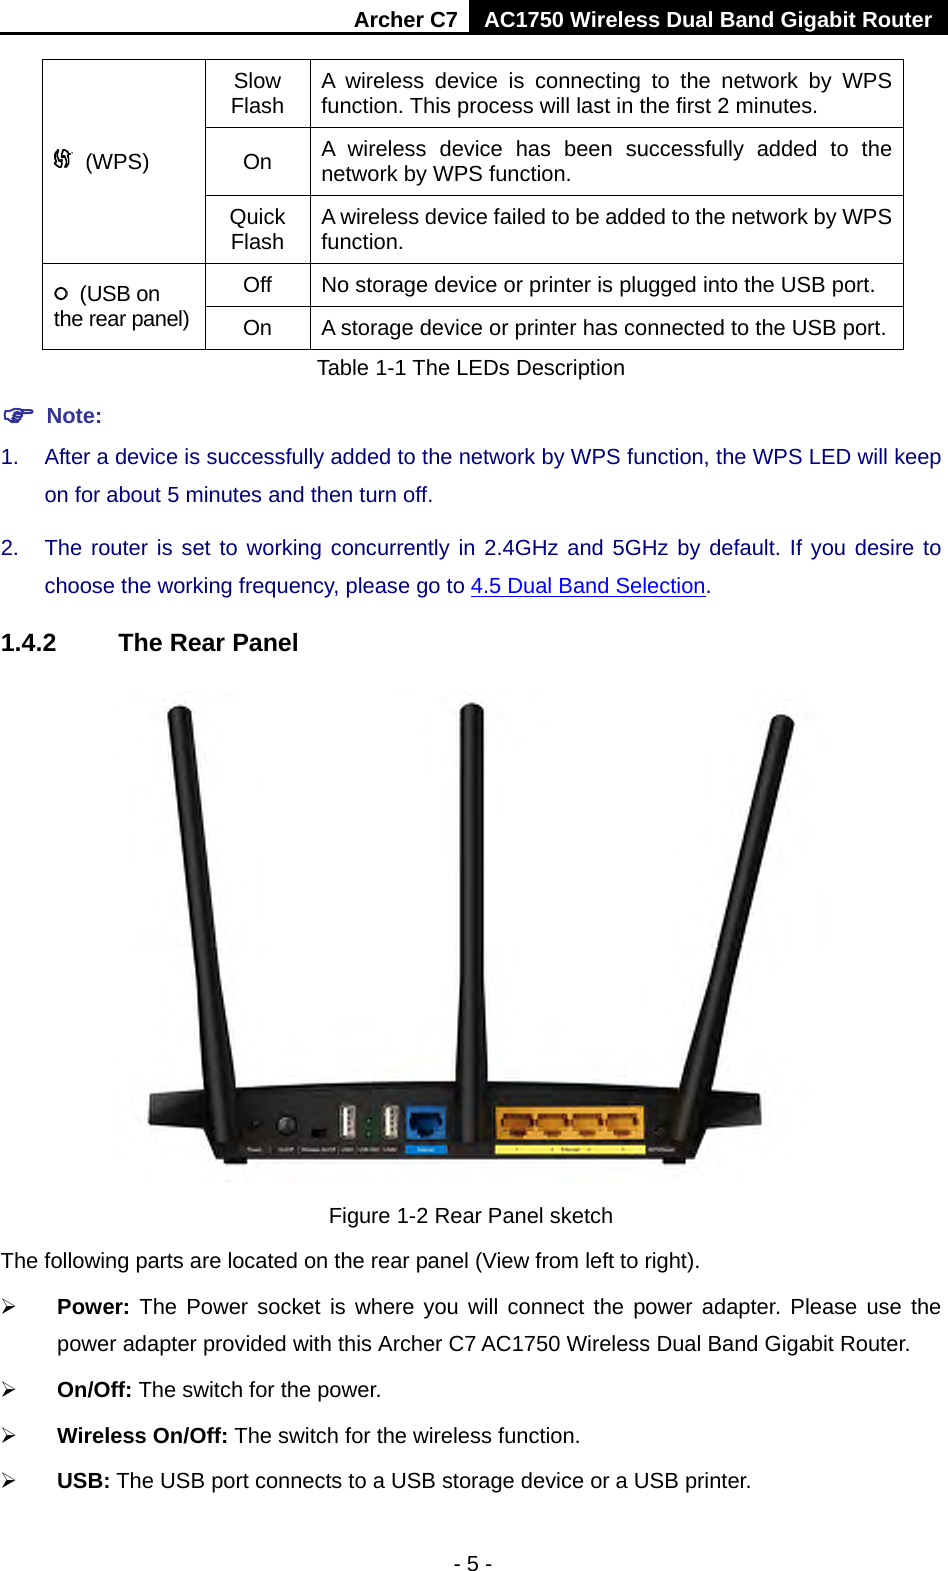 Archer C7 AC1750 Wireless Dual Band Gigabit Router  - 5 -   (WPS) Slow Flash A  wireless  device is connecting to the network by WPS function. This process will last in the first 2 minutes. On A  wireless  device has been successfully added to the network by WPS function.   Quick Flash A wireless device failed to be added to the network by WPS function.   (USB on the rear panel) Off No storage device or printer is plugged into the USB port. On A storage device or printer has connected to the USB port.  Table 1-1 The LEDs Description  Note: 1. After a device is successfully added to the network by WPS function, the WPS LED will keep on for about 5 minutes and then turn off.   2. The router is set to working concurrently in 2.4GHz and 5GHz by default. If you desire to choose the working frequency, please go to 4.5 Dual Band Selection. 1.4.2 The Rear Panel  Figure 1-2 Rear Panel sketch The following parts are located on the rear panel (View from left to right).  Power: The Power socket is where you will connect the power adapter. Please use the power adapter provided with this Archer C7 AC1750 Wireless Dual Band Gigabit Router.  On/Off: The switch for the power.  Wireless On/Off: The switch for the wireless function.  USB: The USB port connects to a USB storage device or a USB printer. 